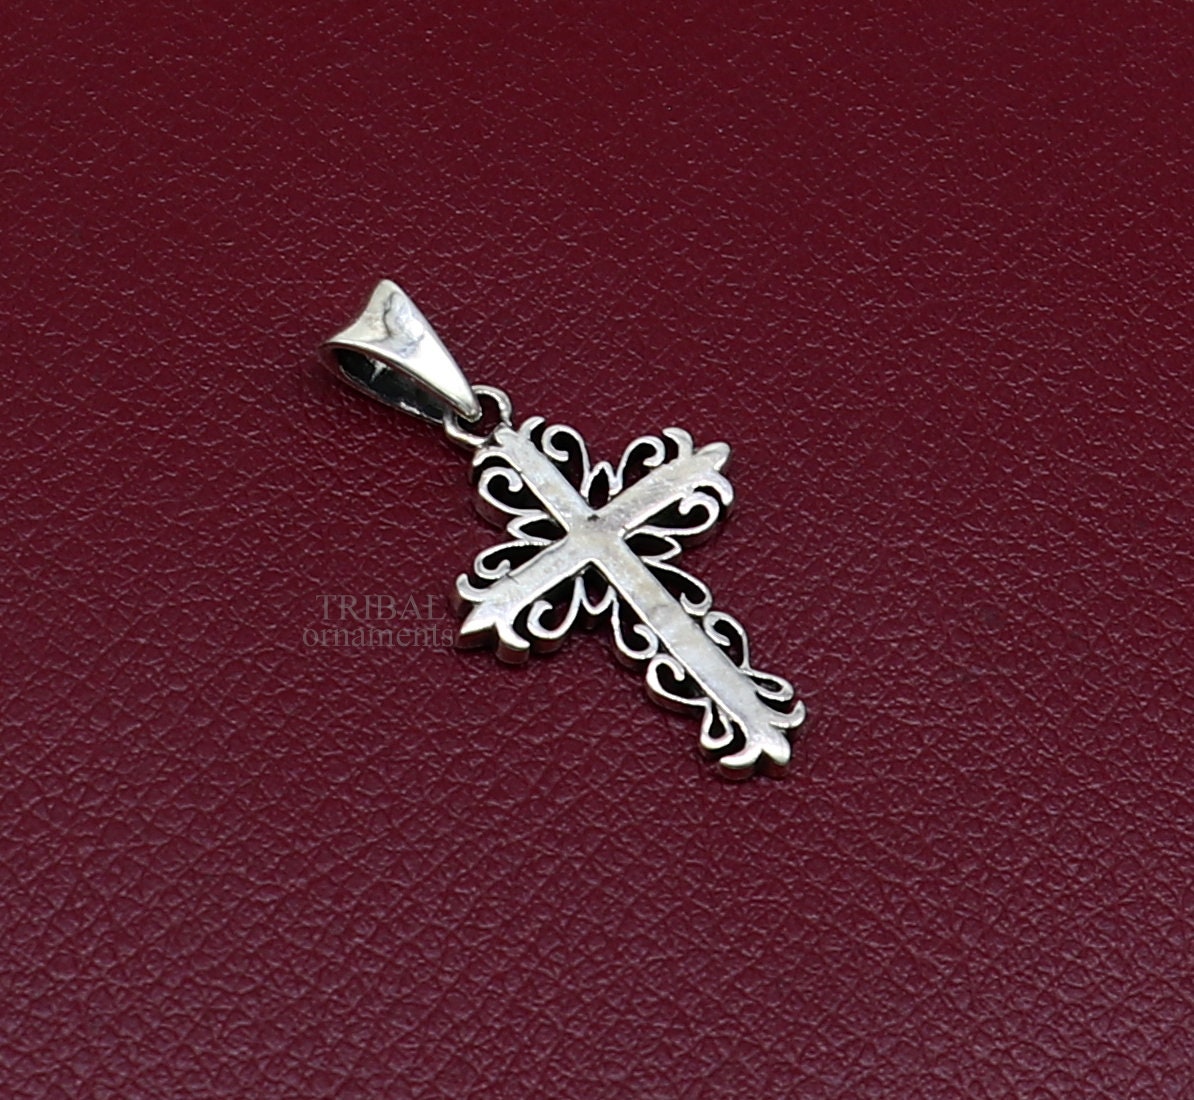 925 sterling silver holy cross pendant, excellent unique design stylish unisex exclusive gift pendant jewelry from india ssp1629 - TRIBAL ORNAMENTS